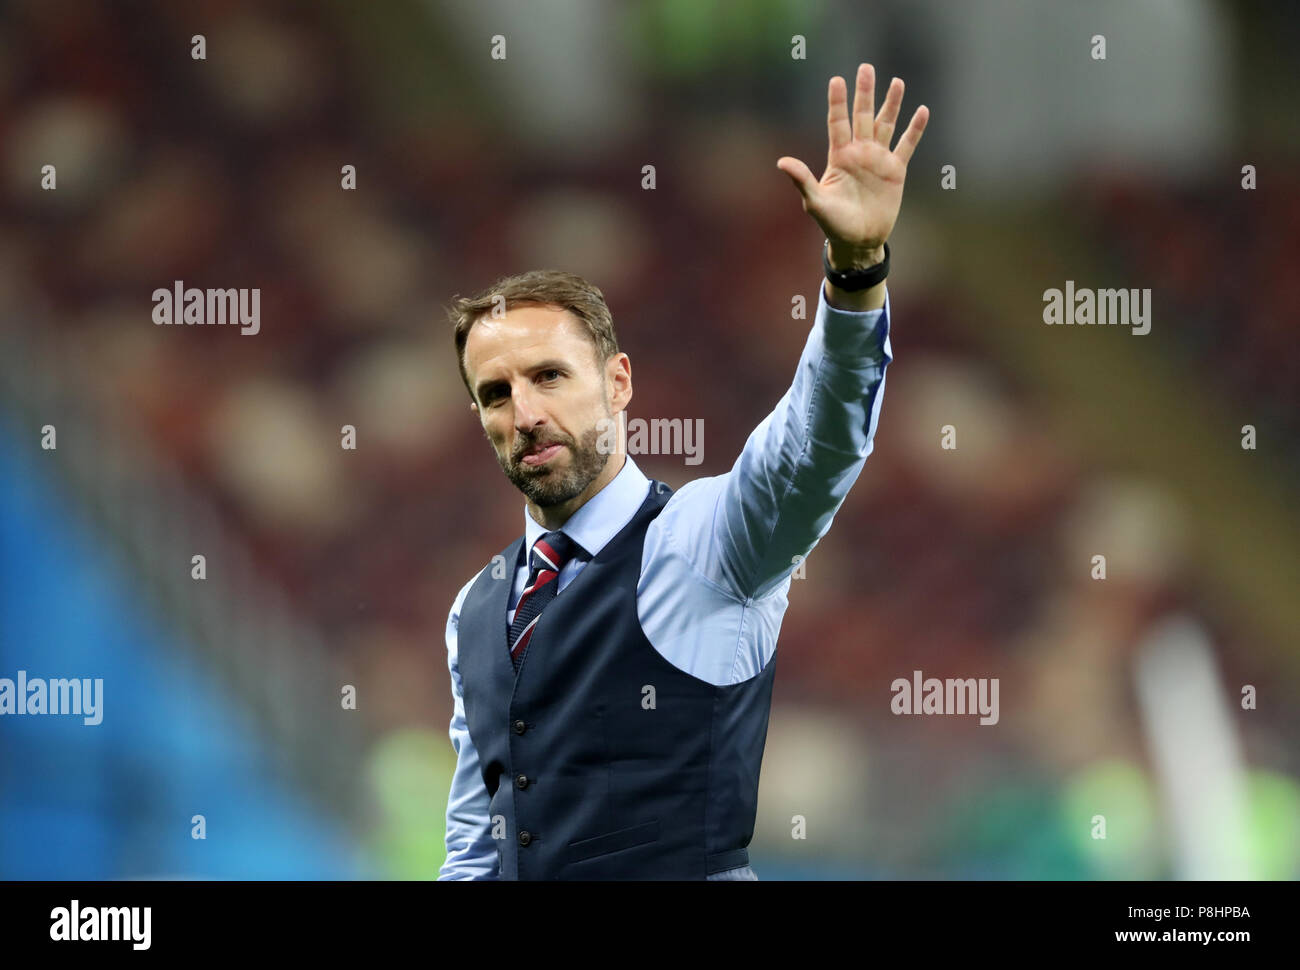 England manager Gareth Southgate wavesto fans after the FIFA World Cup, Semi Final match at the Luzhniki Stadium, Moscow. PRESS ASSOCIATION Photo. Picture date: Wednesday July 11, 2018. See PA story WORLDCUP Croatia. Photo credit should read: Owen Humphreys/PA Wire. Stock Photo